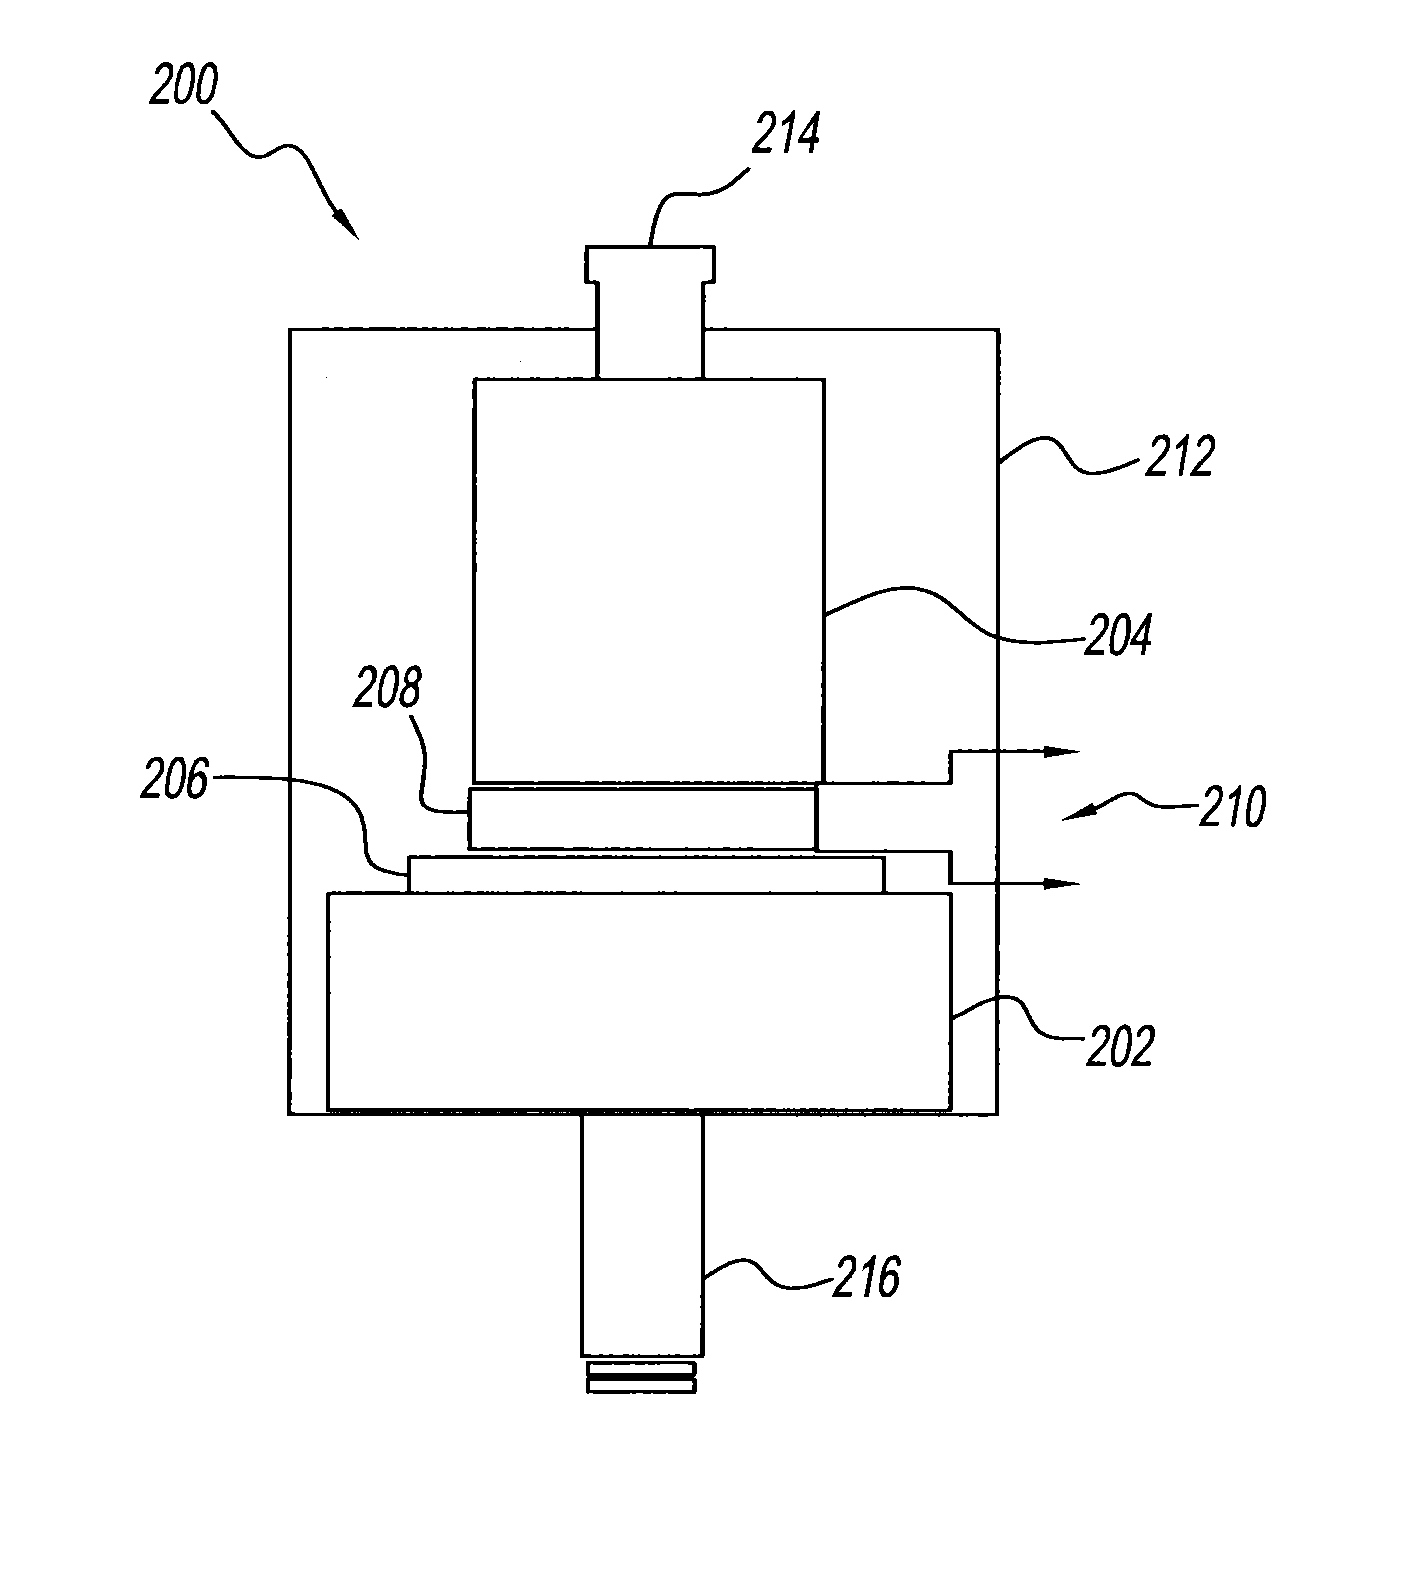 Piezoelectric glass ceramic compositions and piezoelectric devices made therefrom